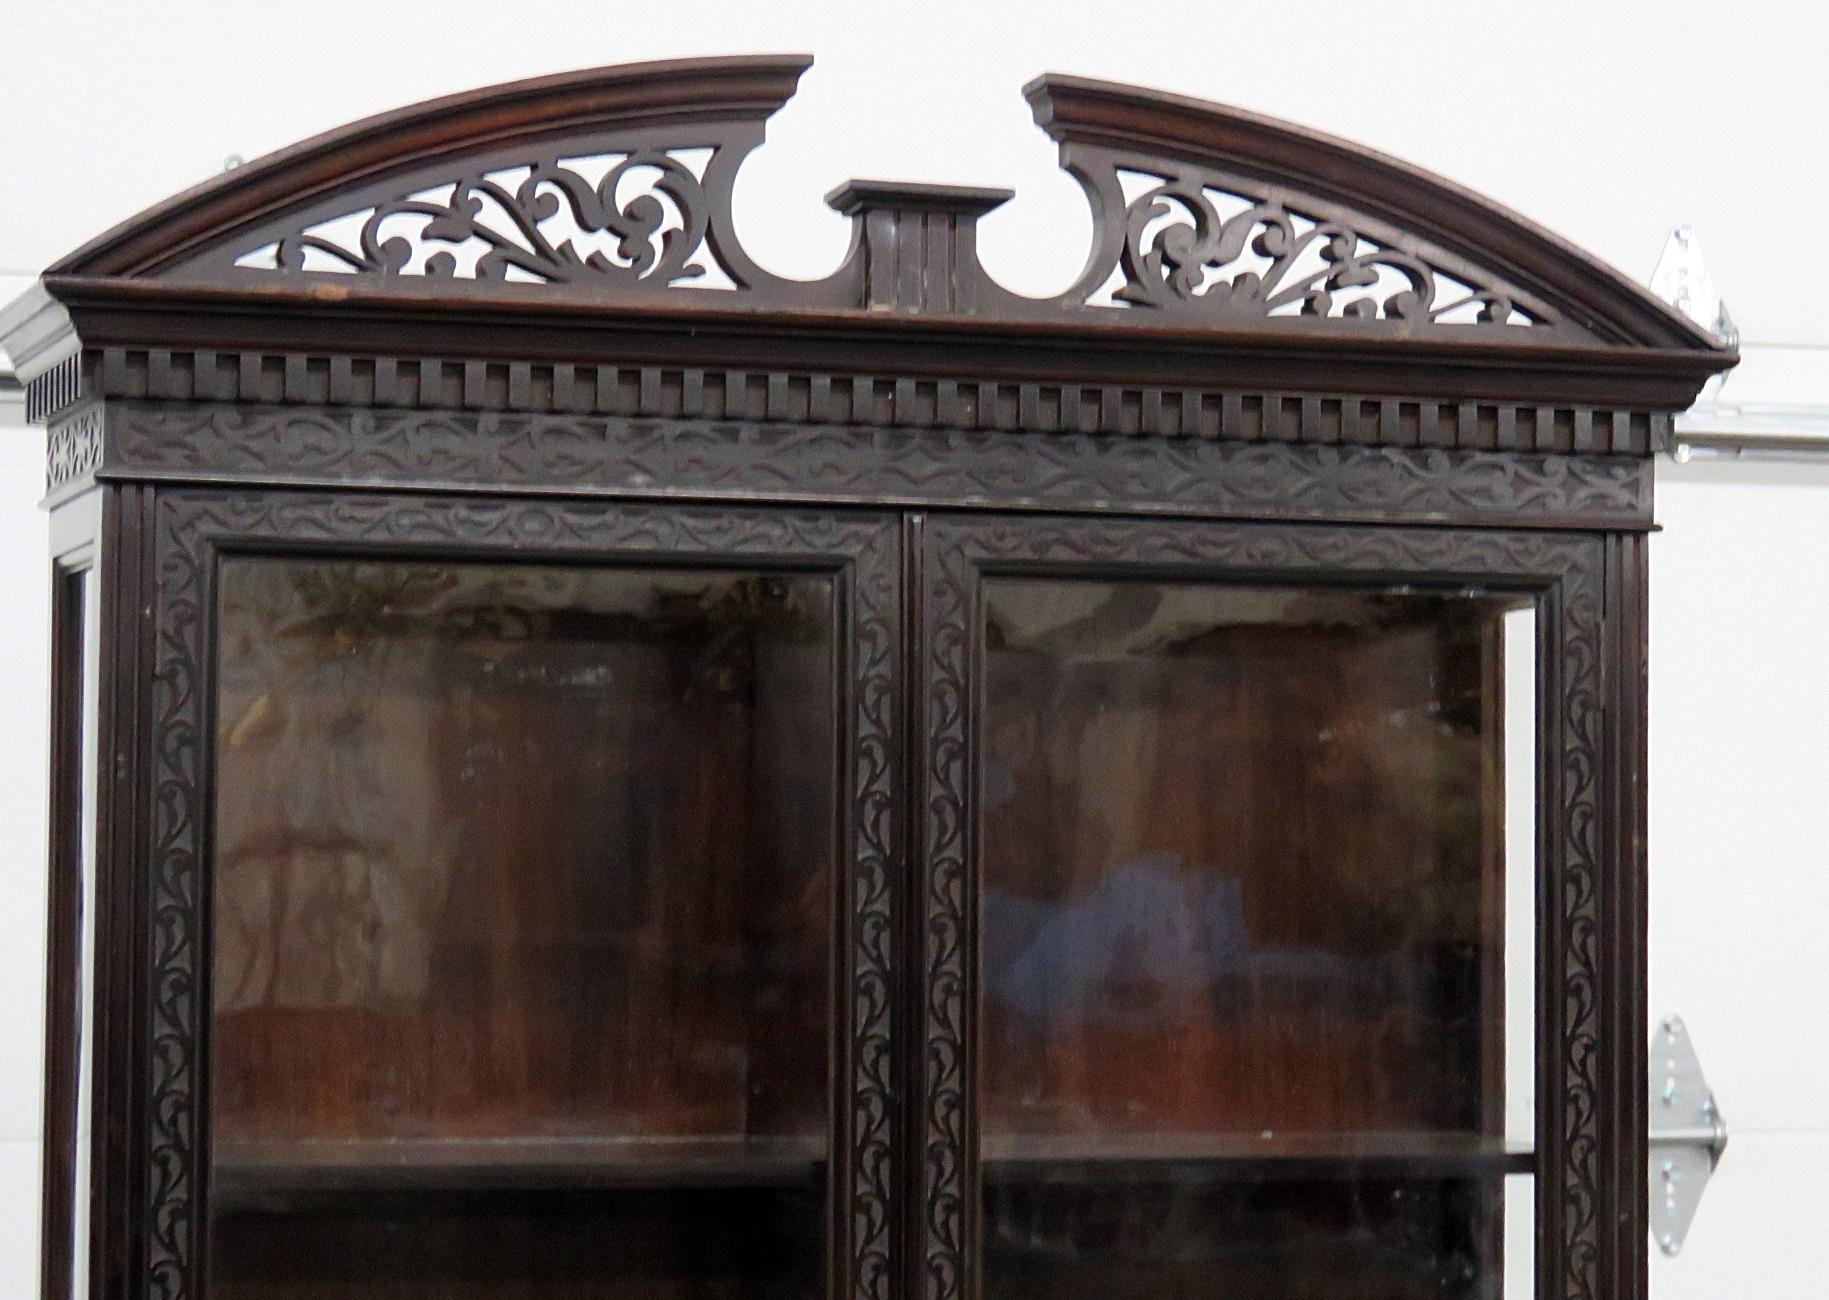 Edwardian English Mahogany Collectors or Jewelry Display Cabinet C1890s  For Sale